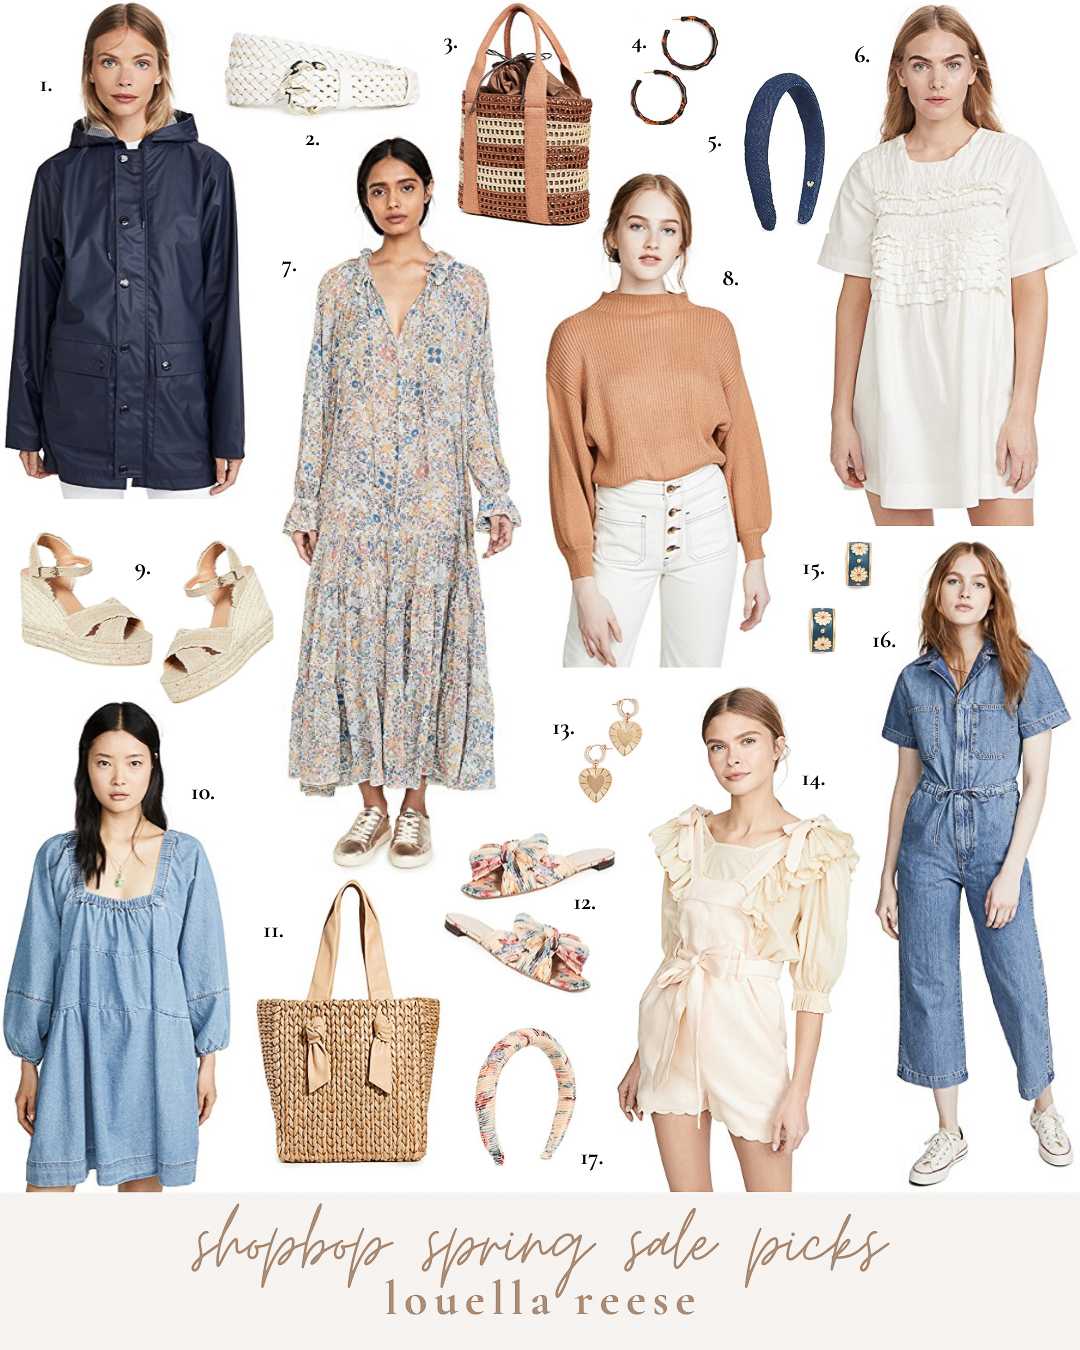 2020 Shopbop Spring Sale Picks Not to Miss